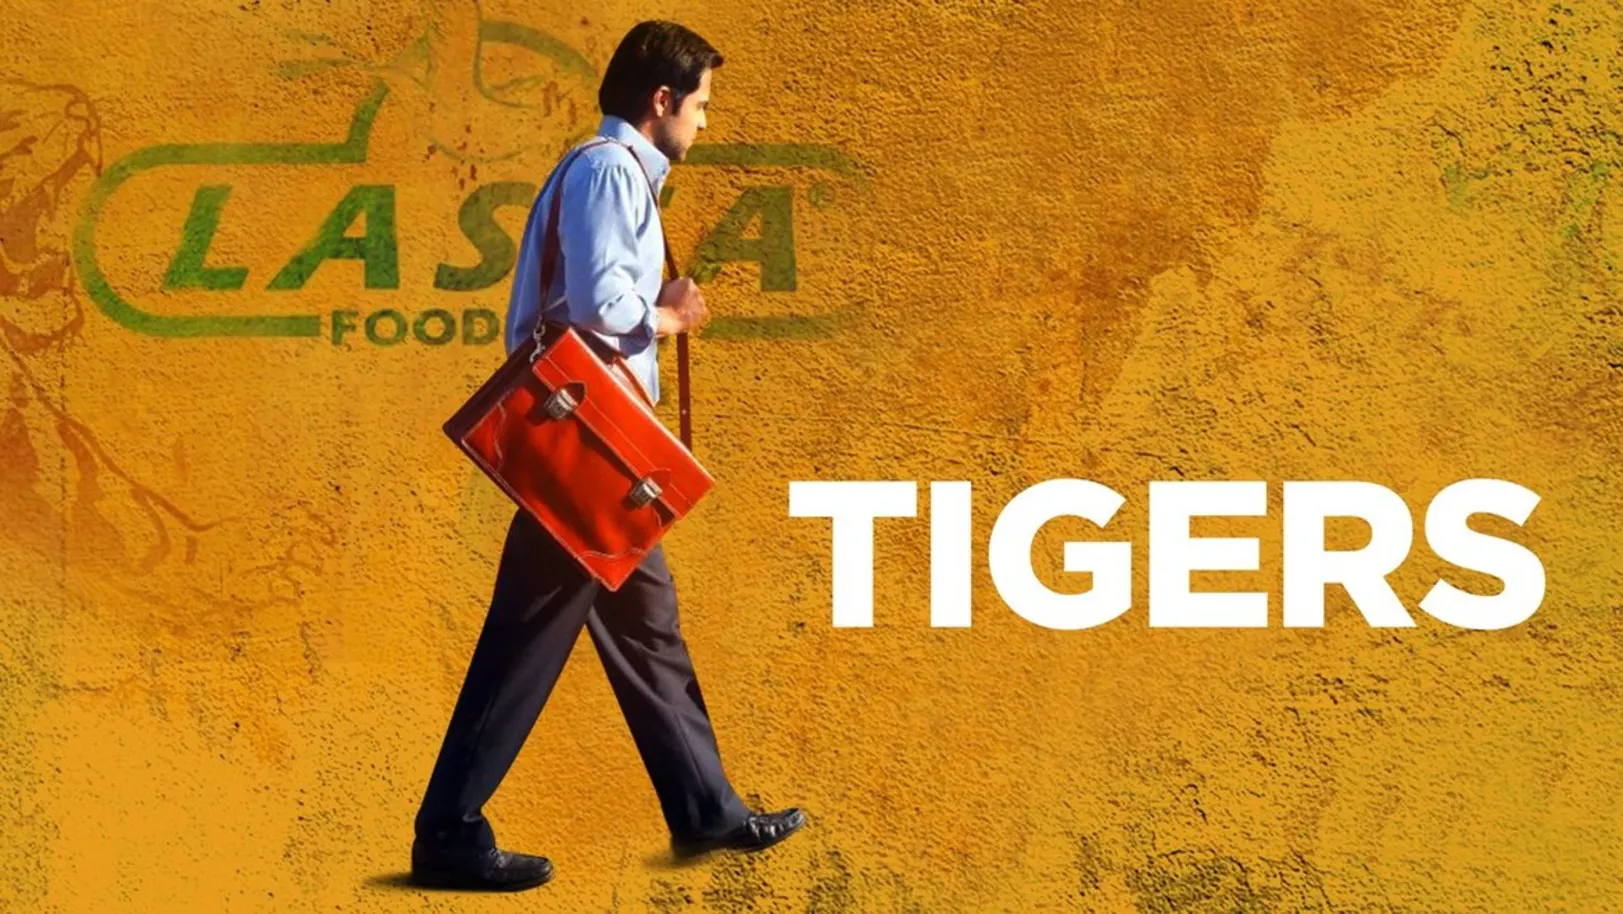 Tigers Streaming Now On &Pictures